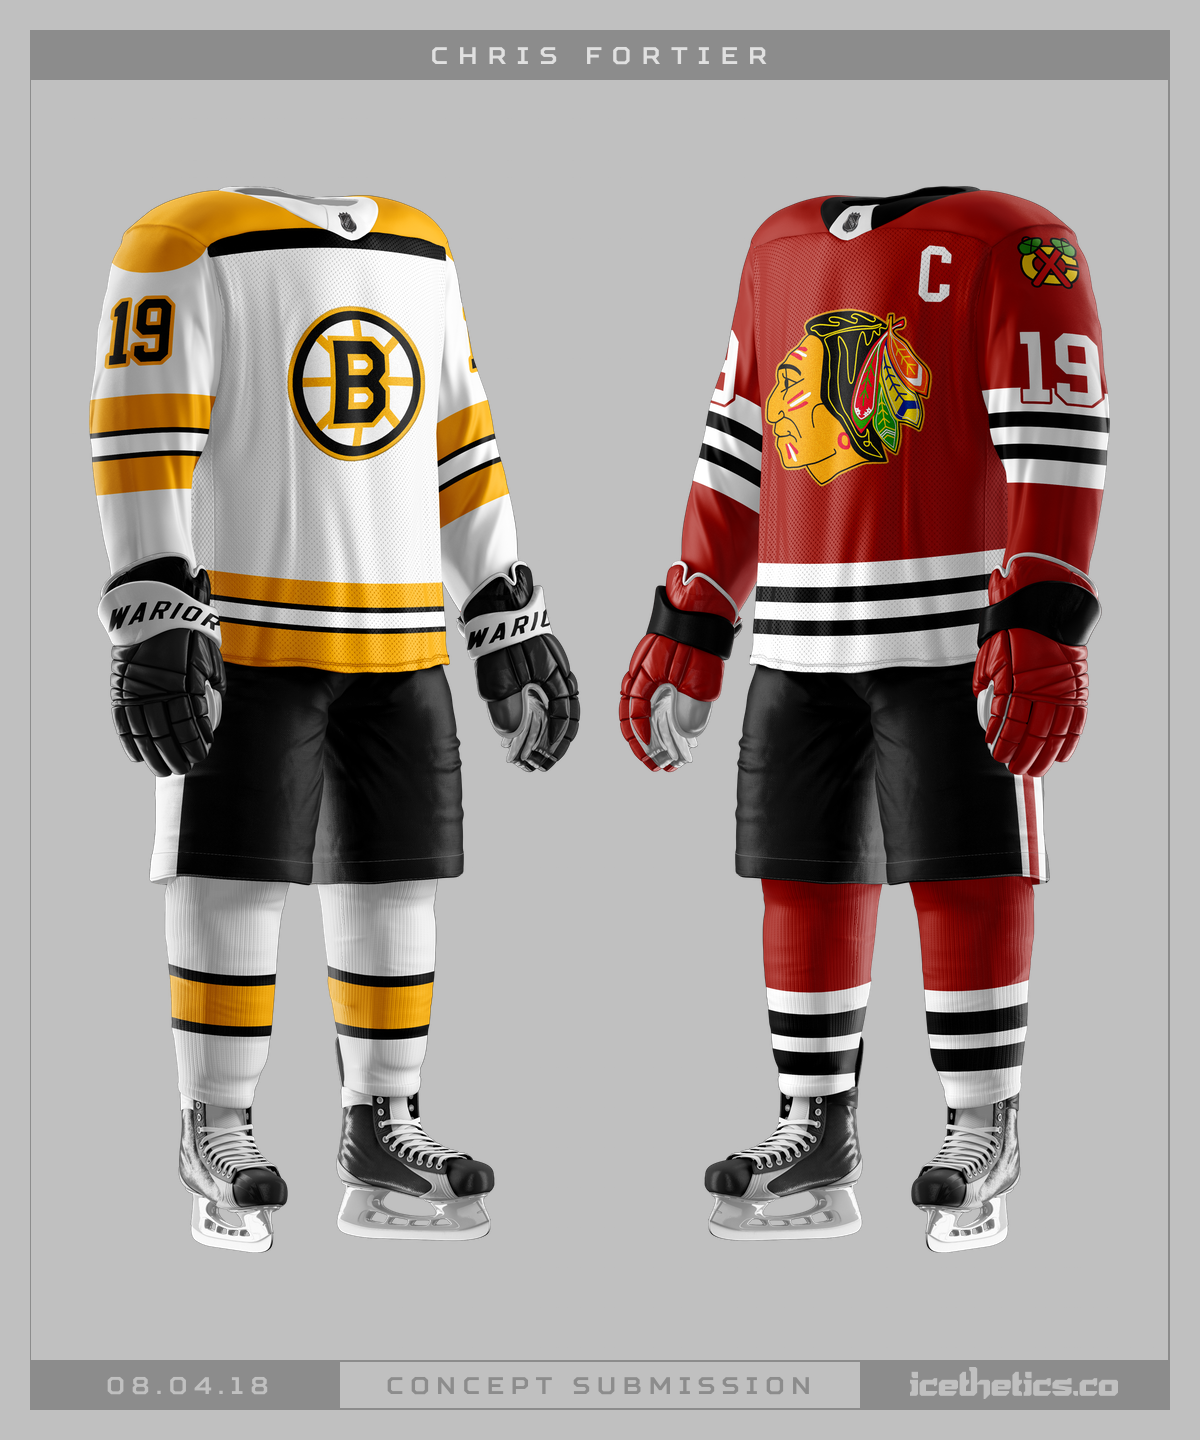 The Next Winter Classic(s) - Old Concepts Page - icethetics.info